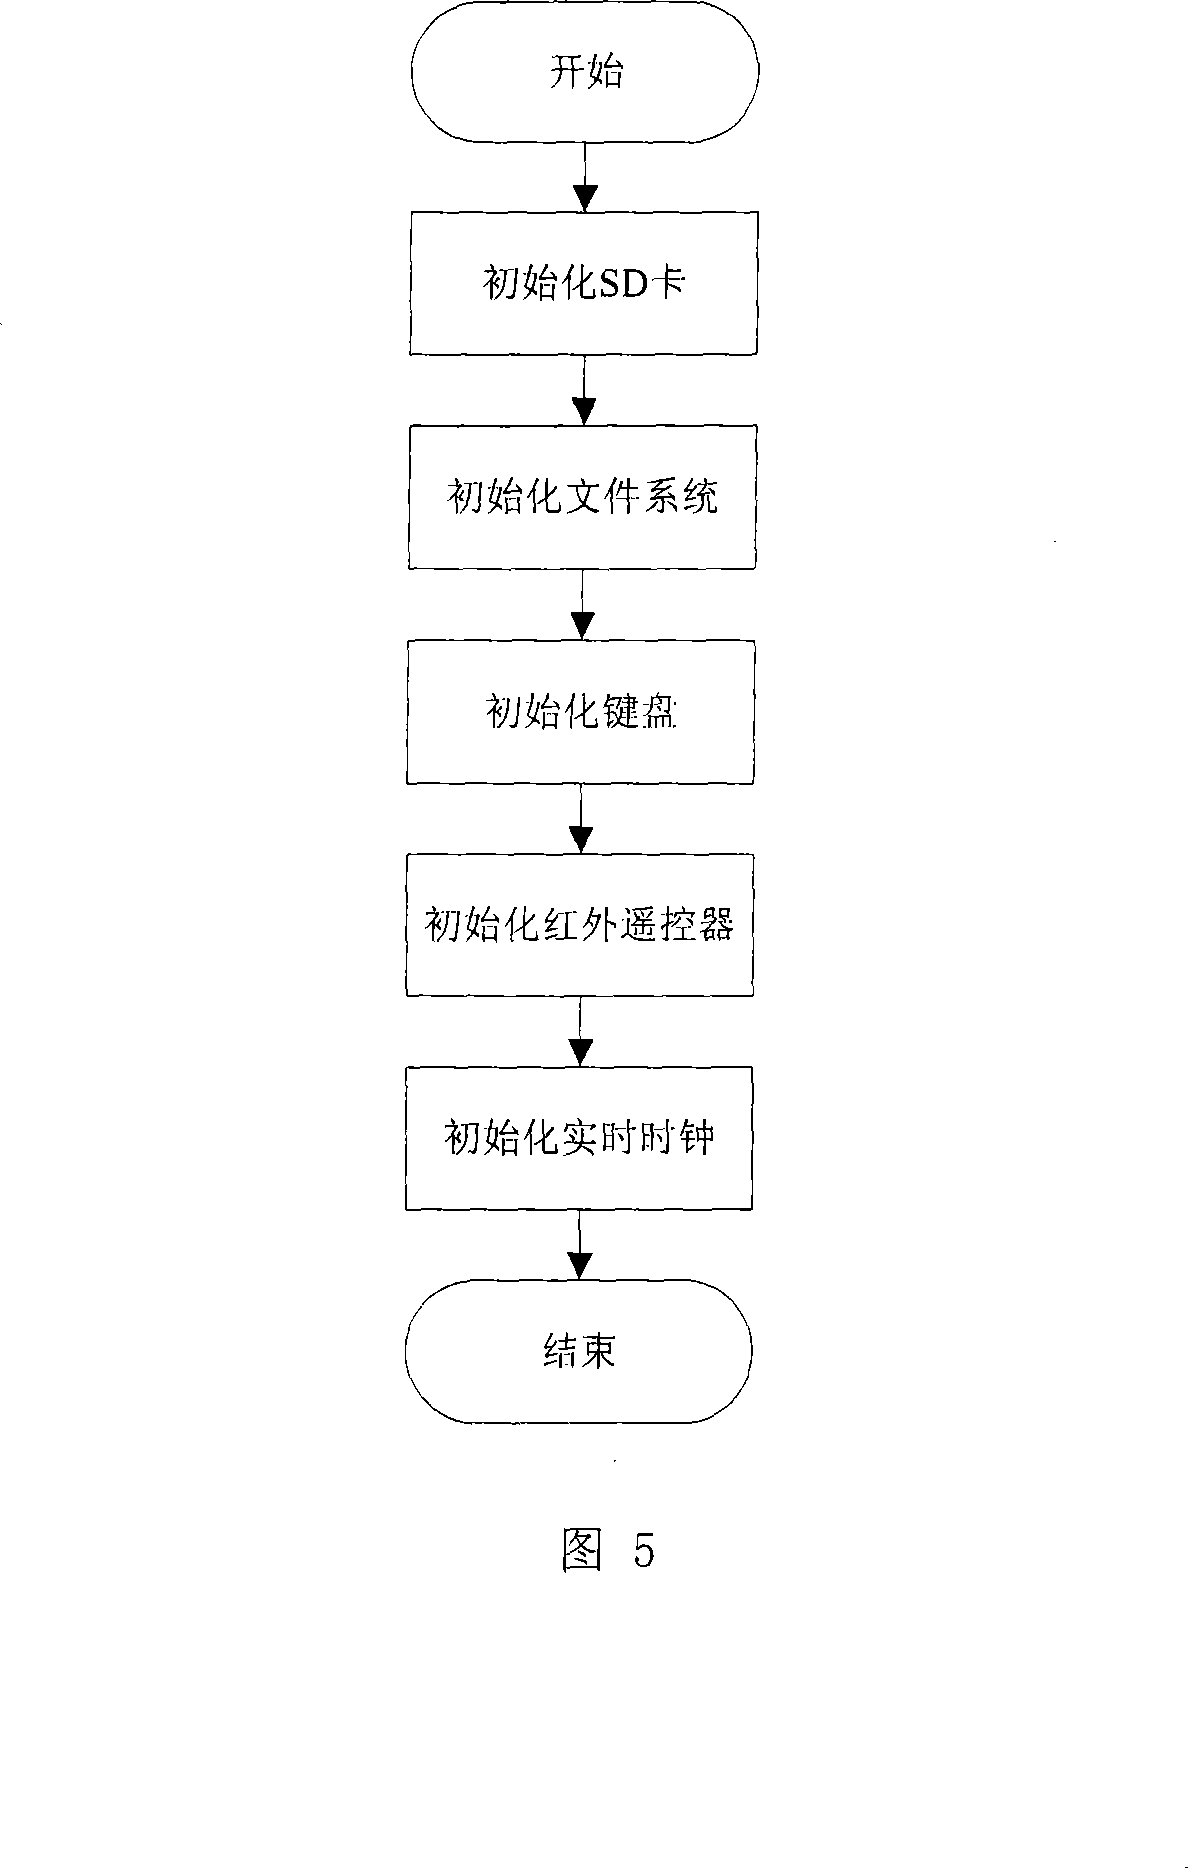 A wireless network video monitoring system of high mobility and the corresponding control method